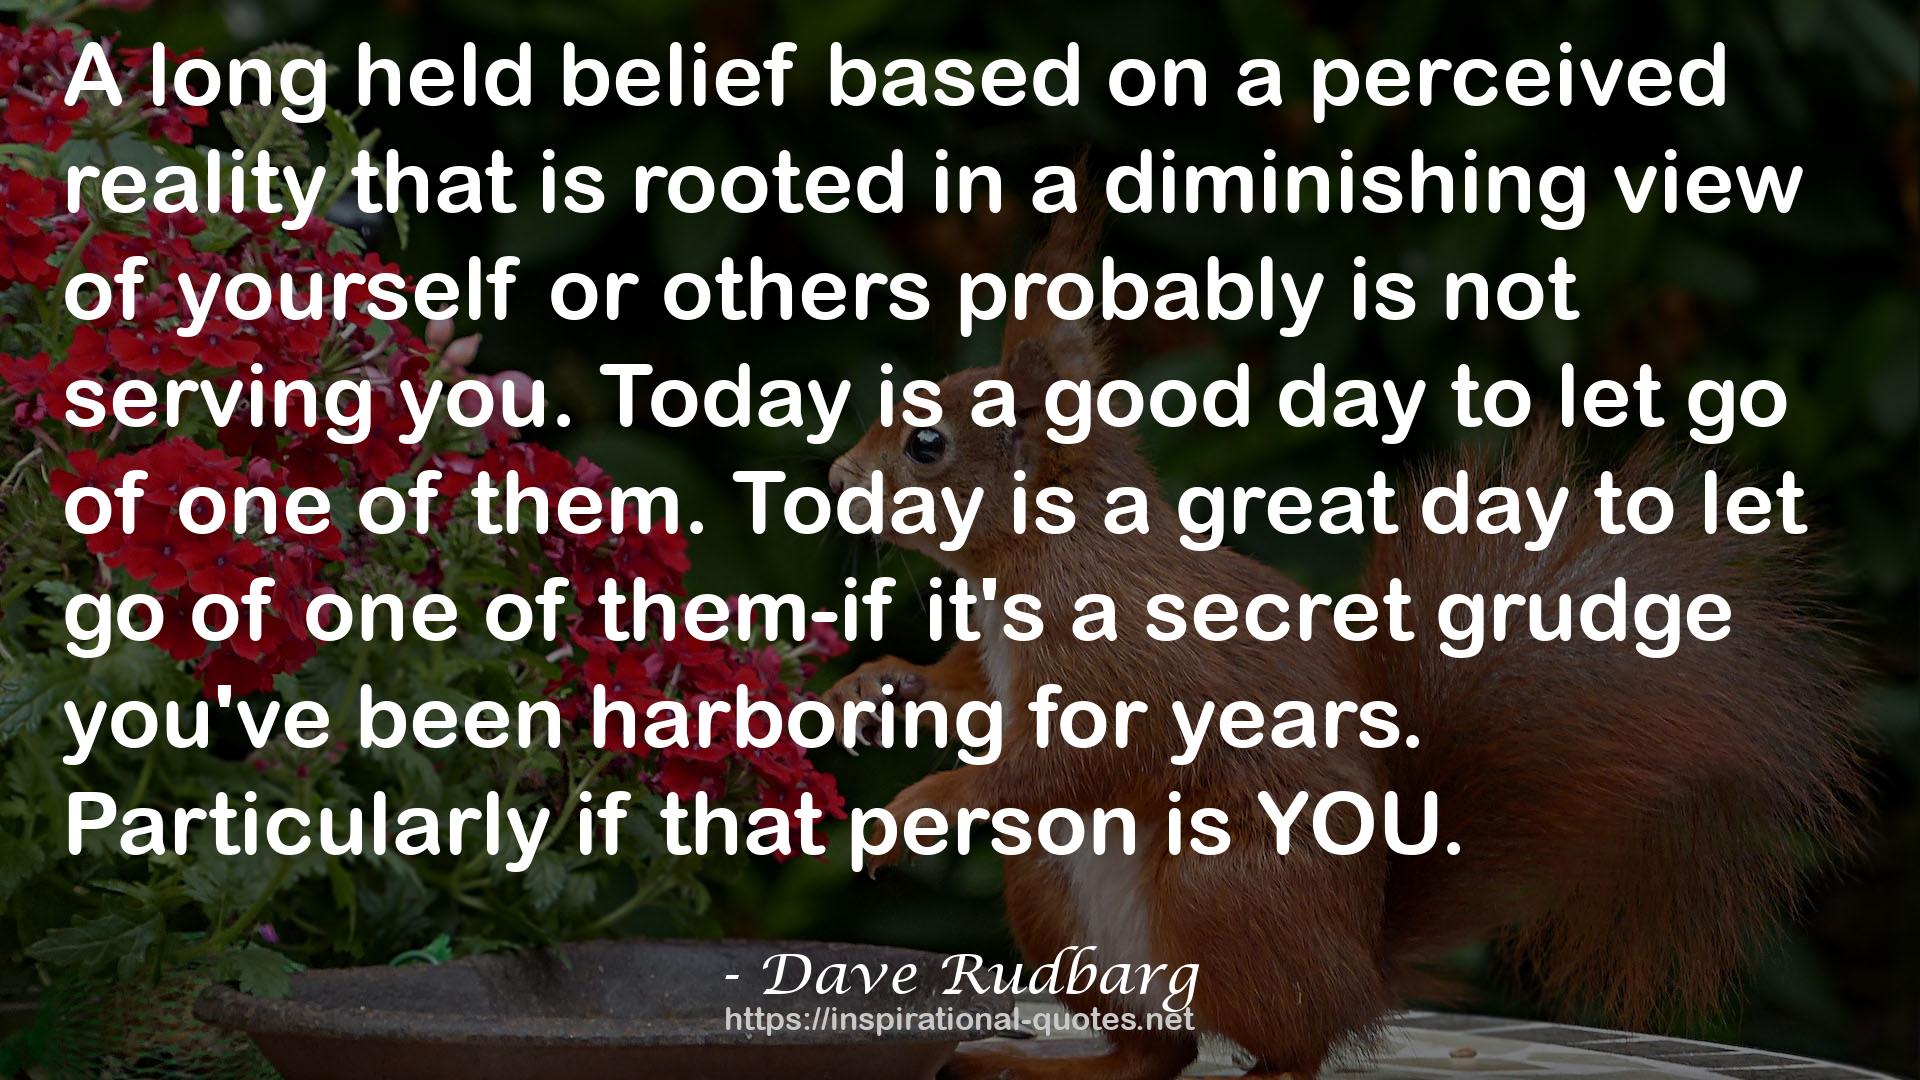 Dave Rudbarg QUOTES